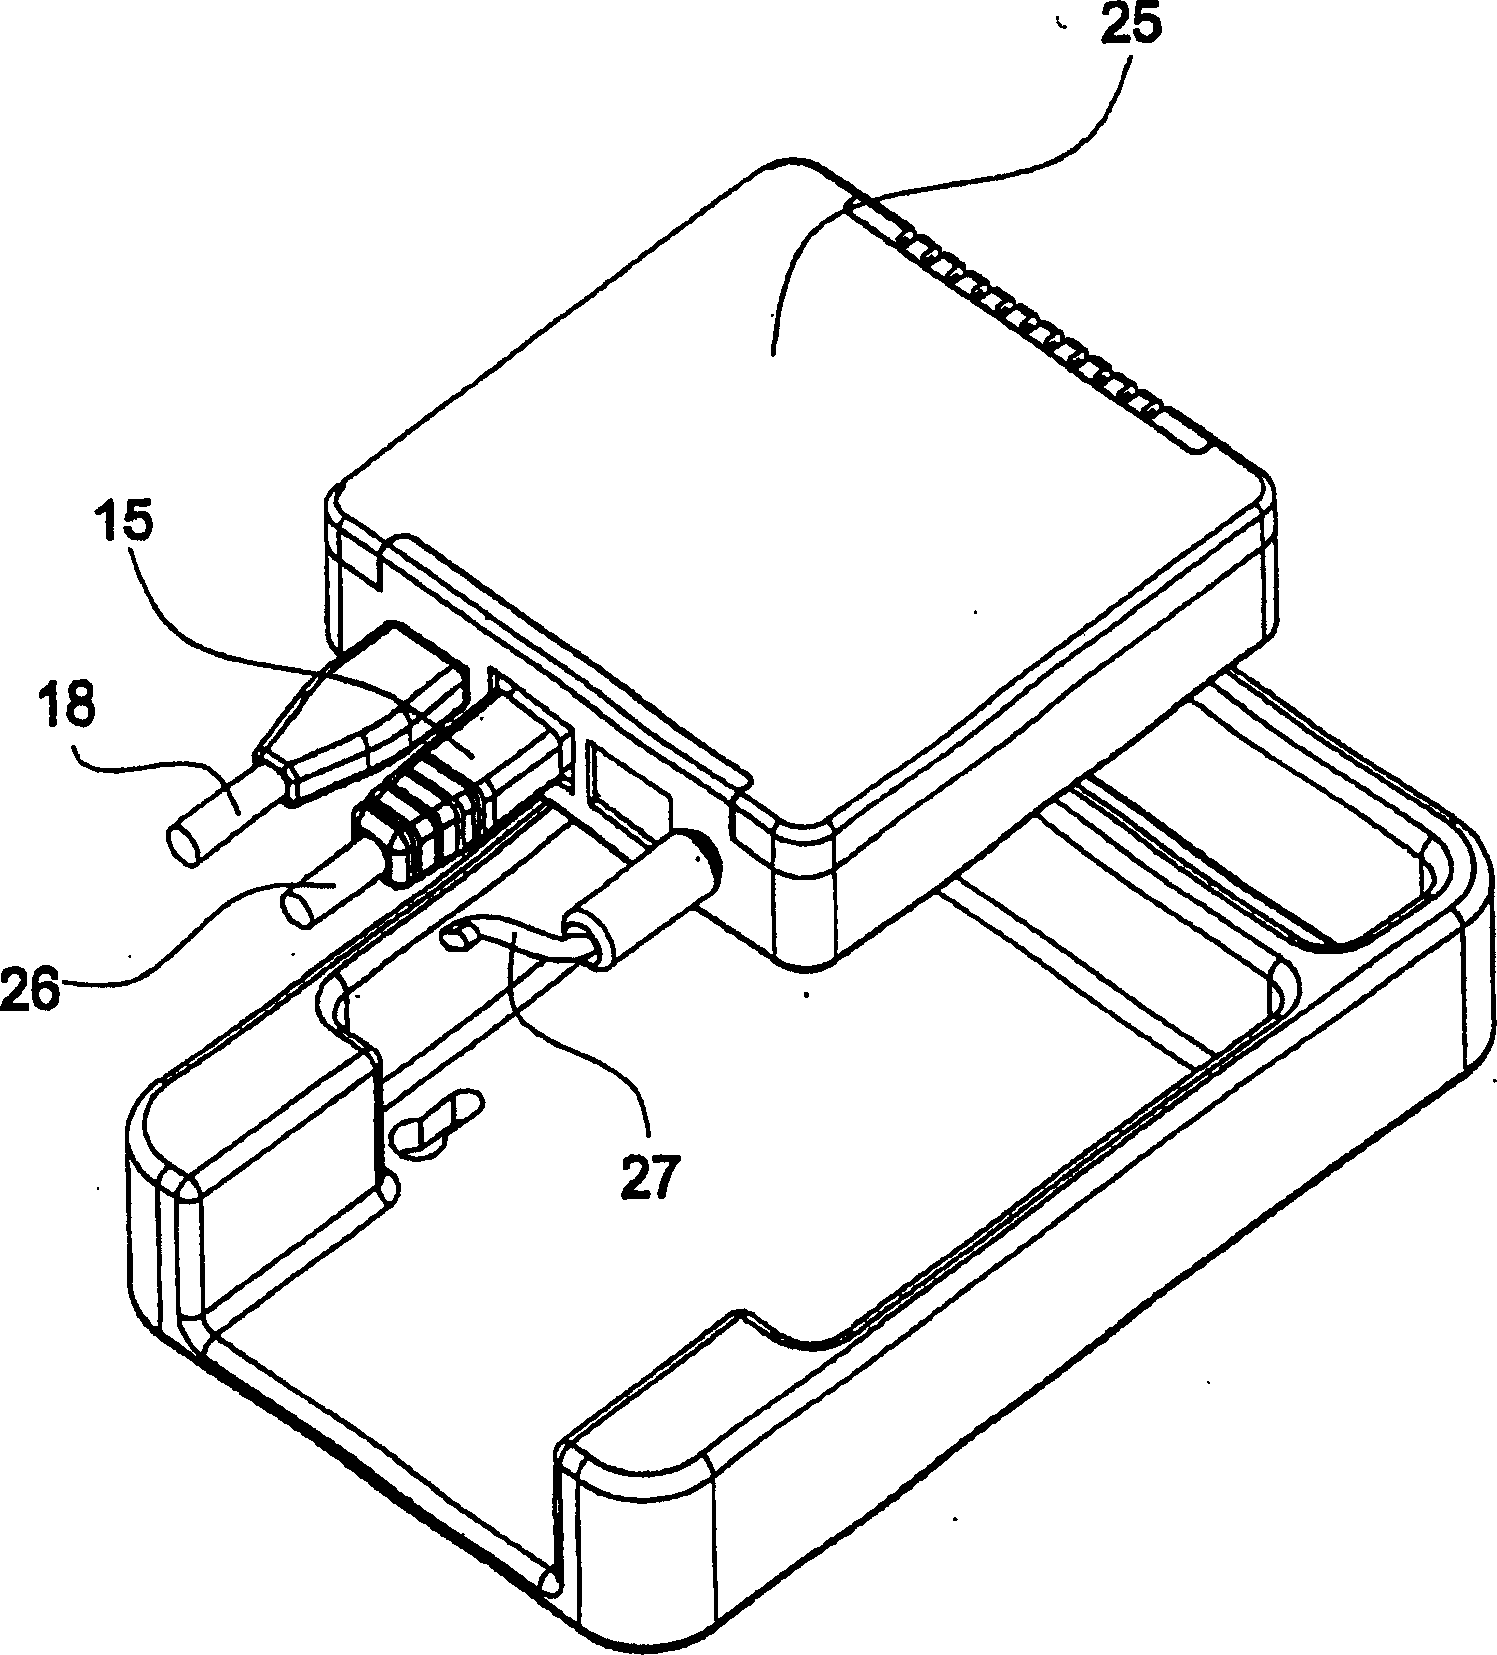 Device and method for remote maintaining elevator